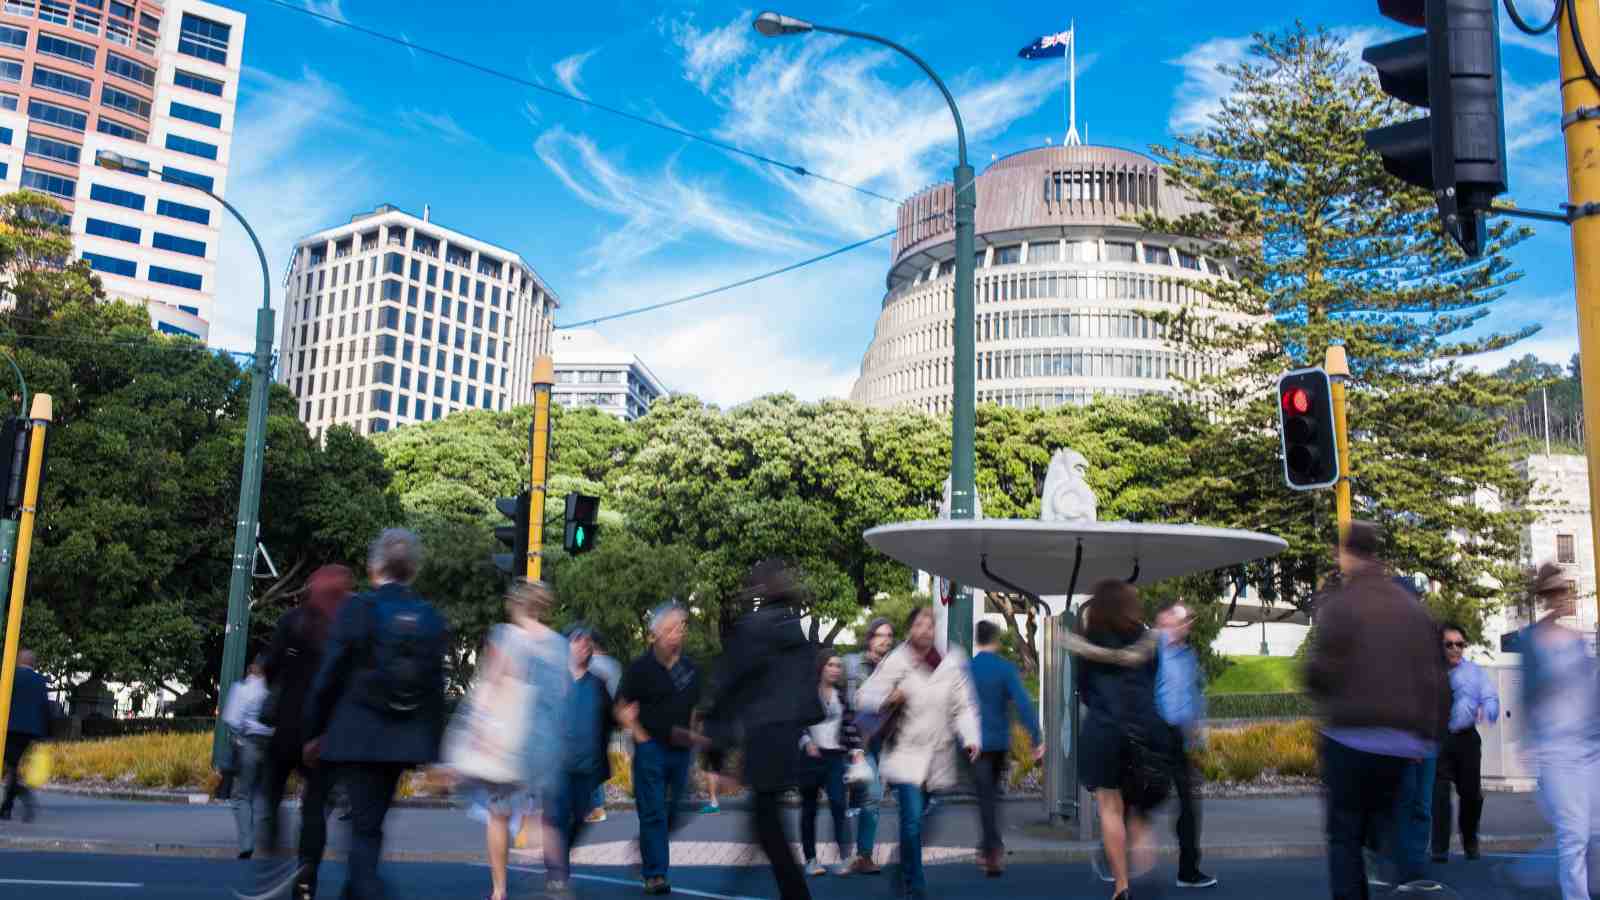 A time-lapse image of commuters walking across a road with parliament’s “Beehive” building in the background.